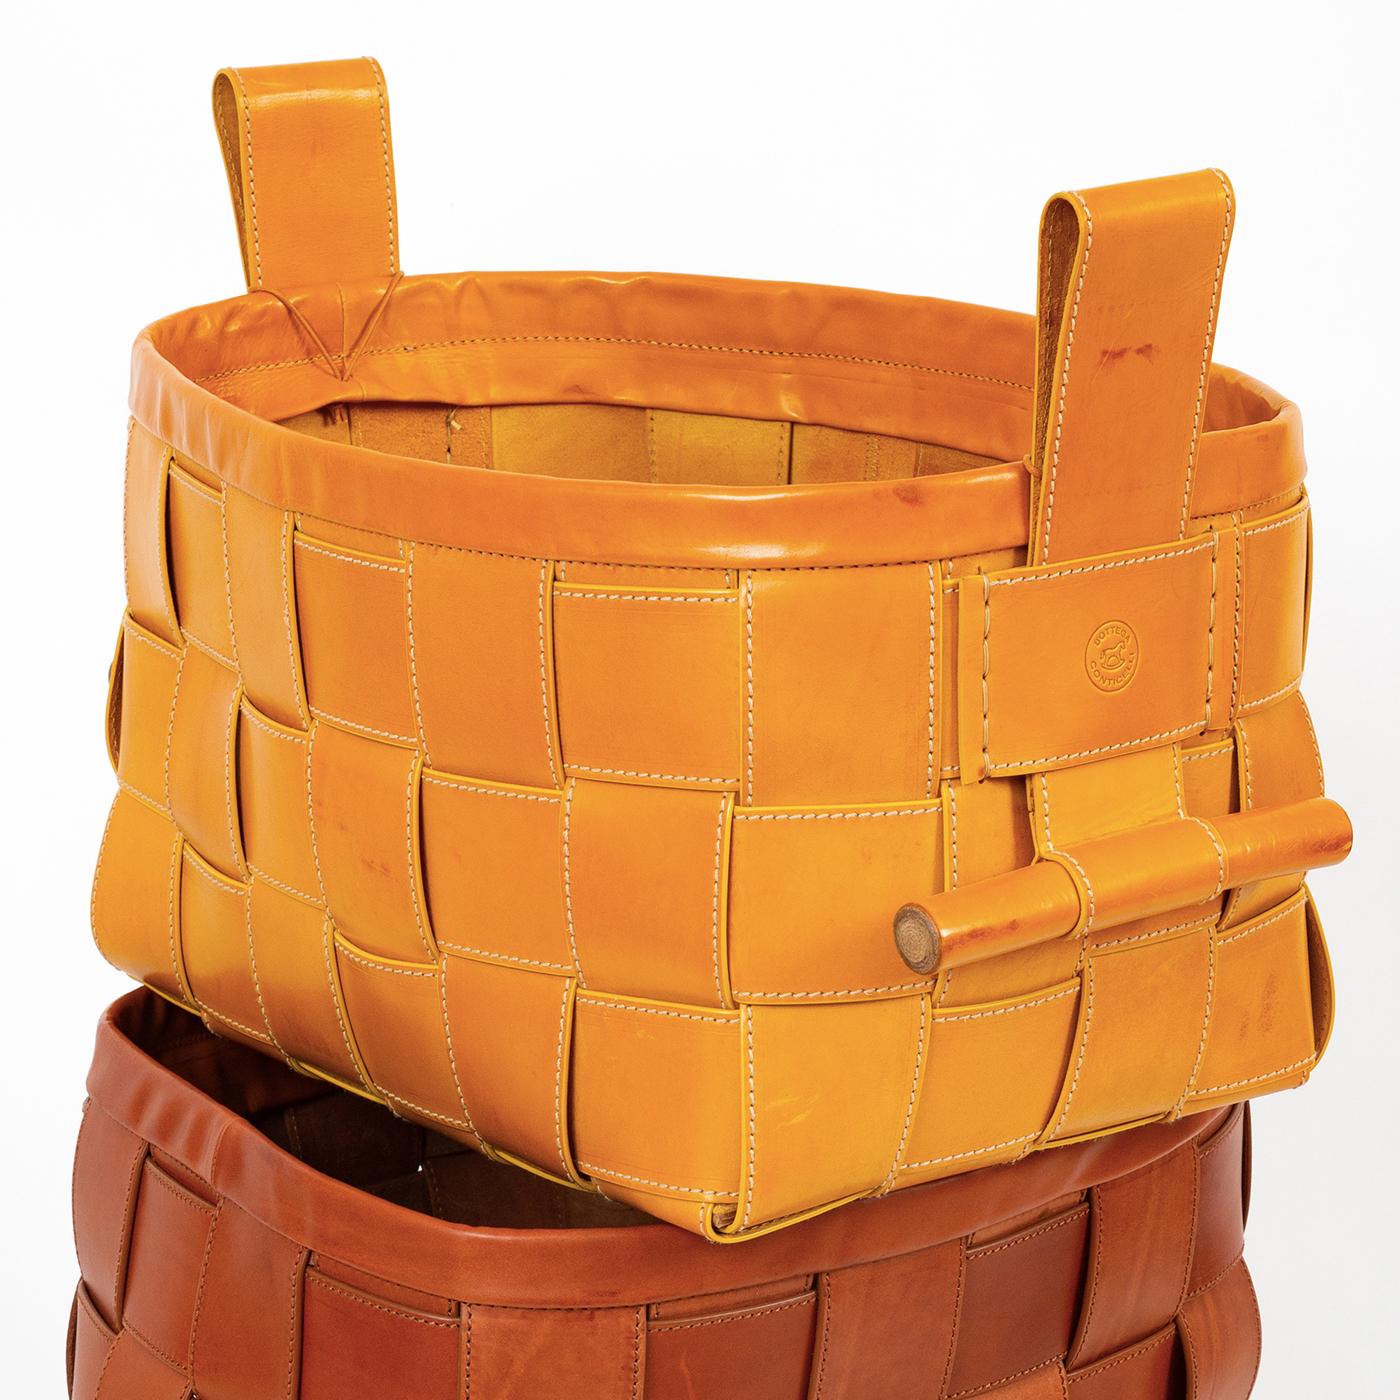 Handwoven in the Italian region of Umbria, this versatile basket is made from the highest-quality leather, utilizing processes that respect the environment. Available in a selection of colors that blend with any environment, it is perfect for